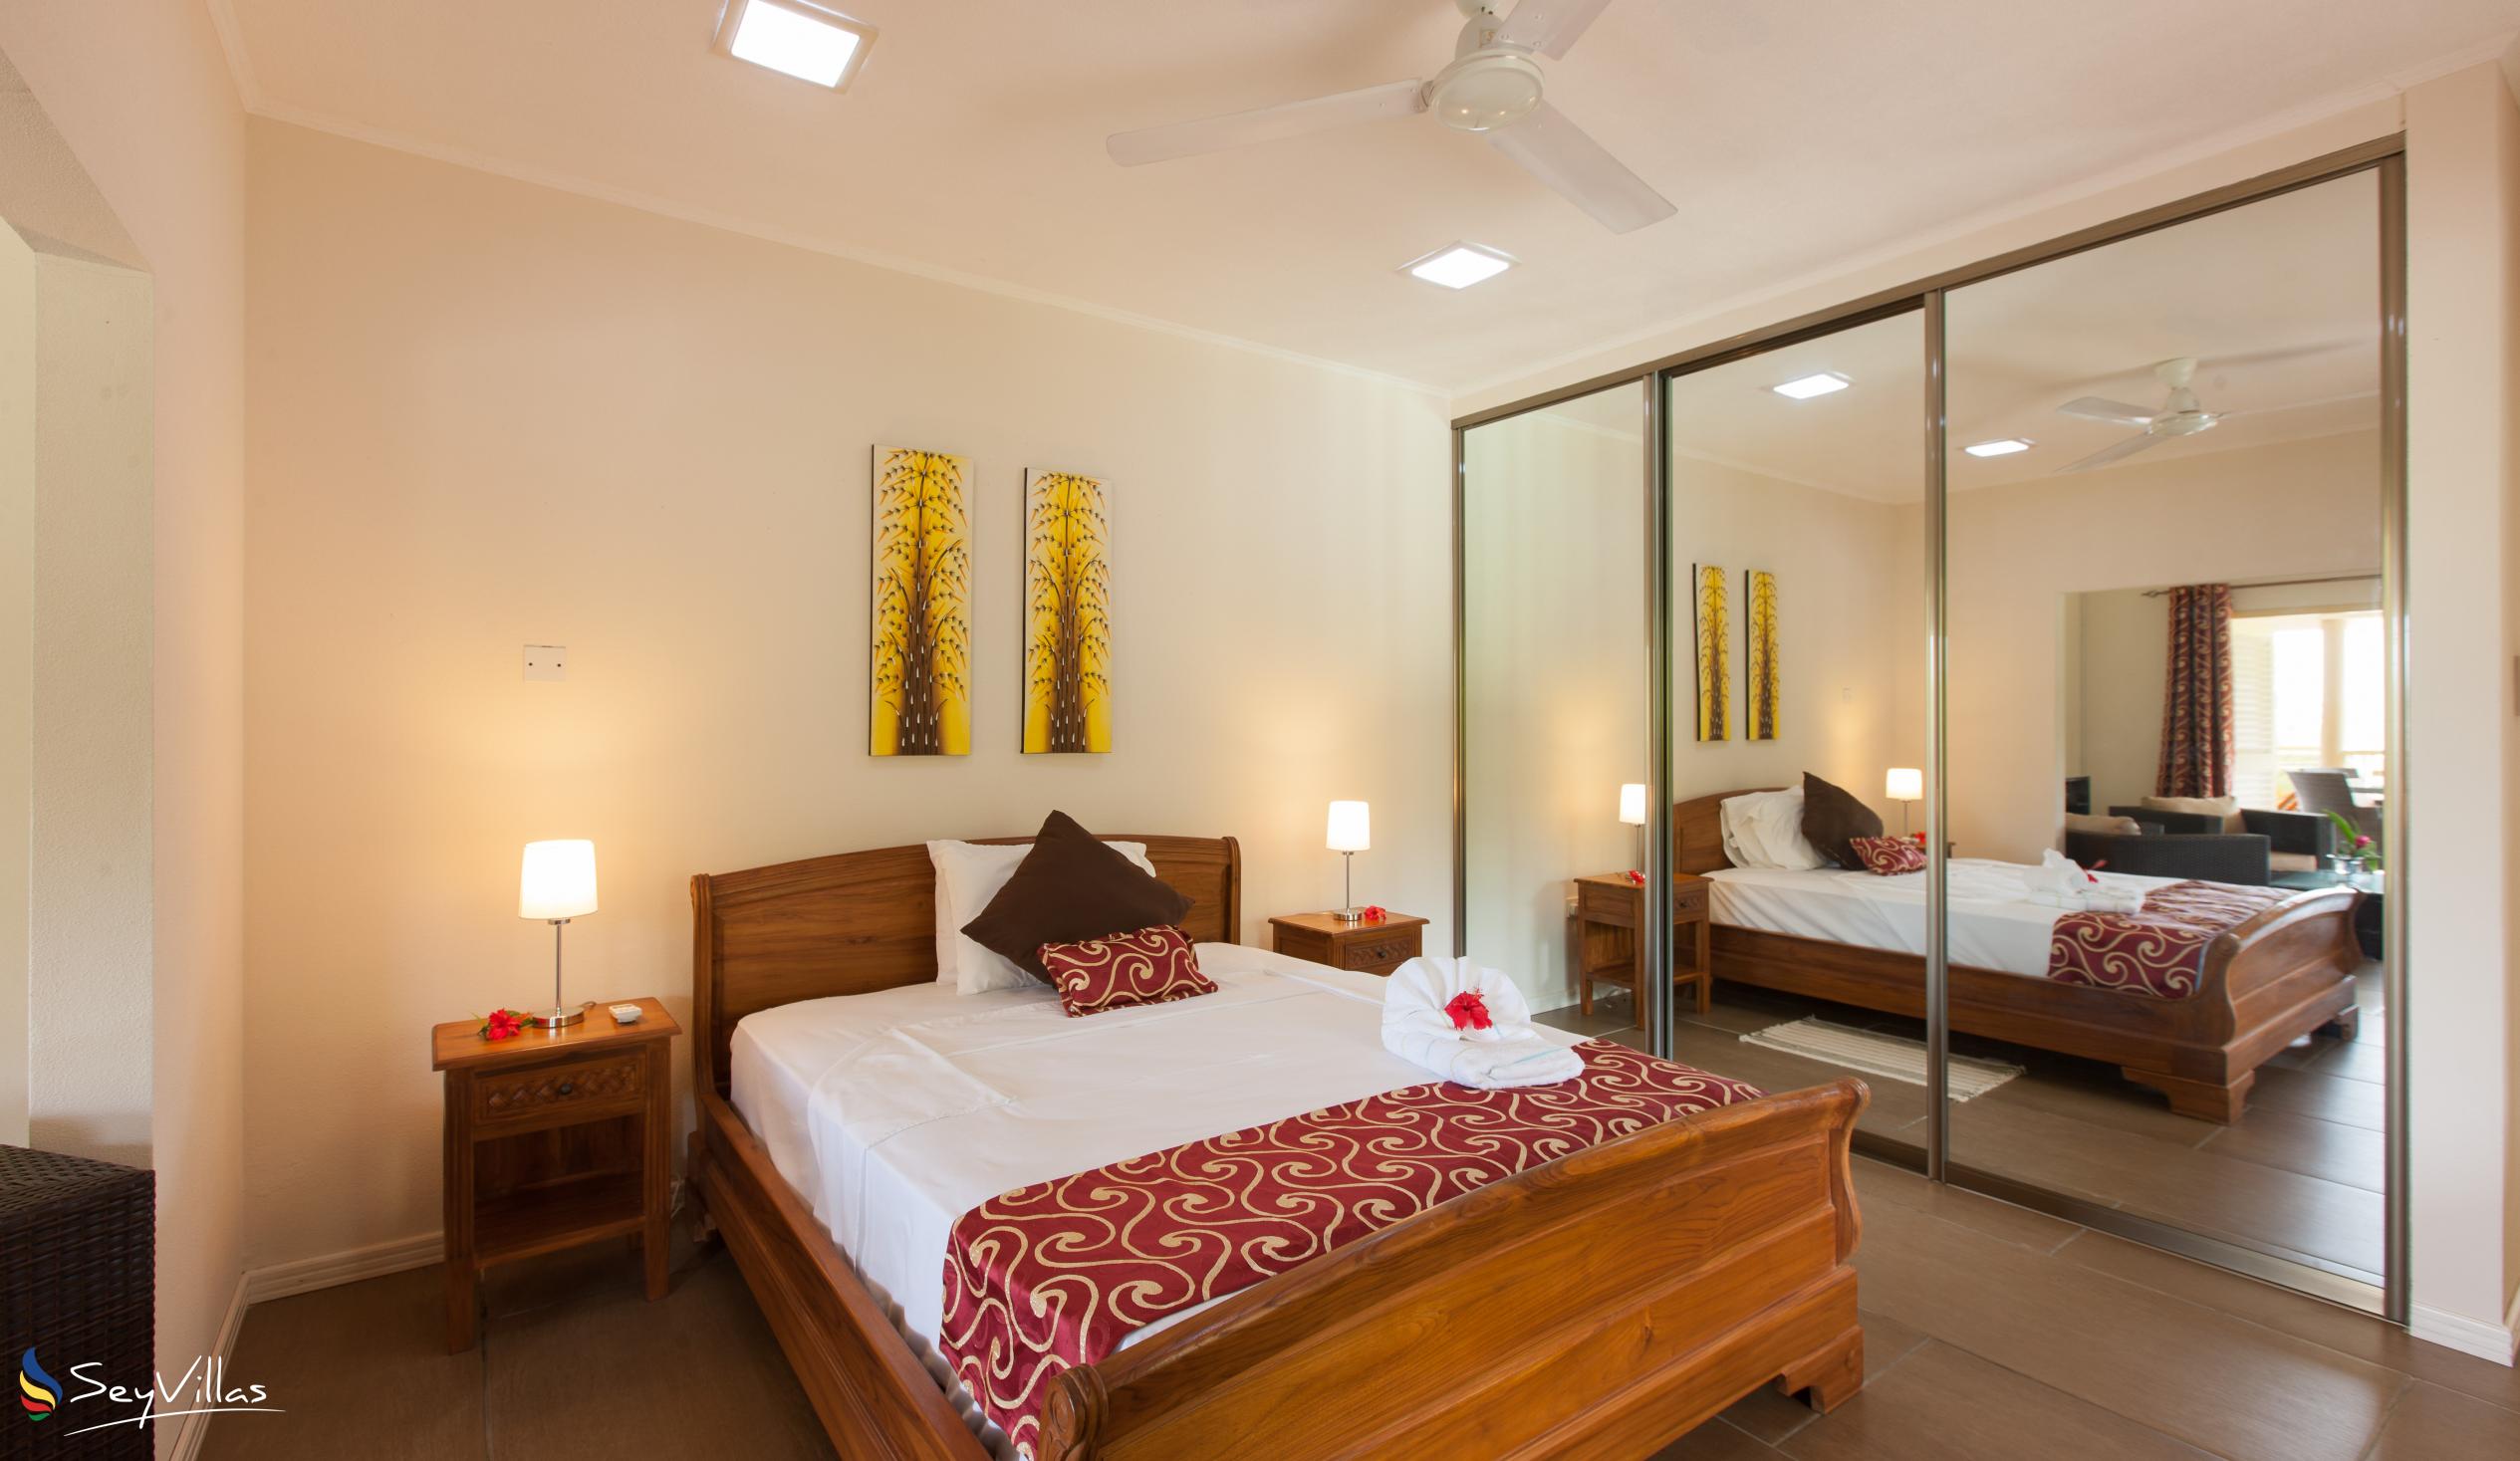 Photo 29: Summer Self Catering - Deluxe Apartment - Praslin (Seychelles)